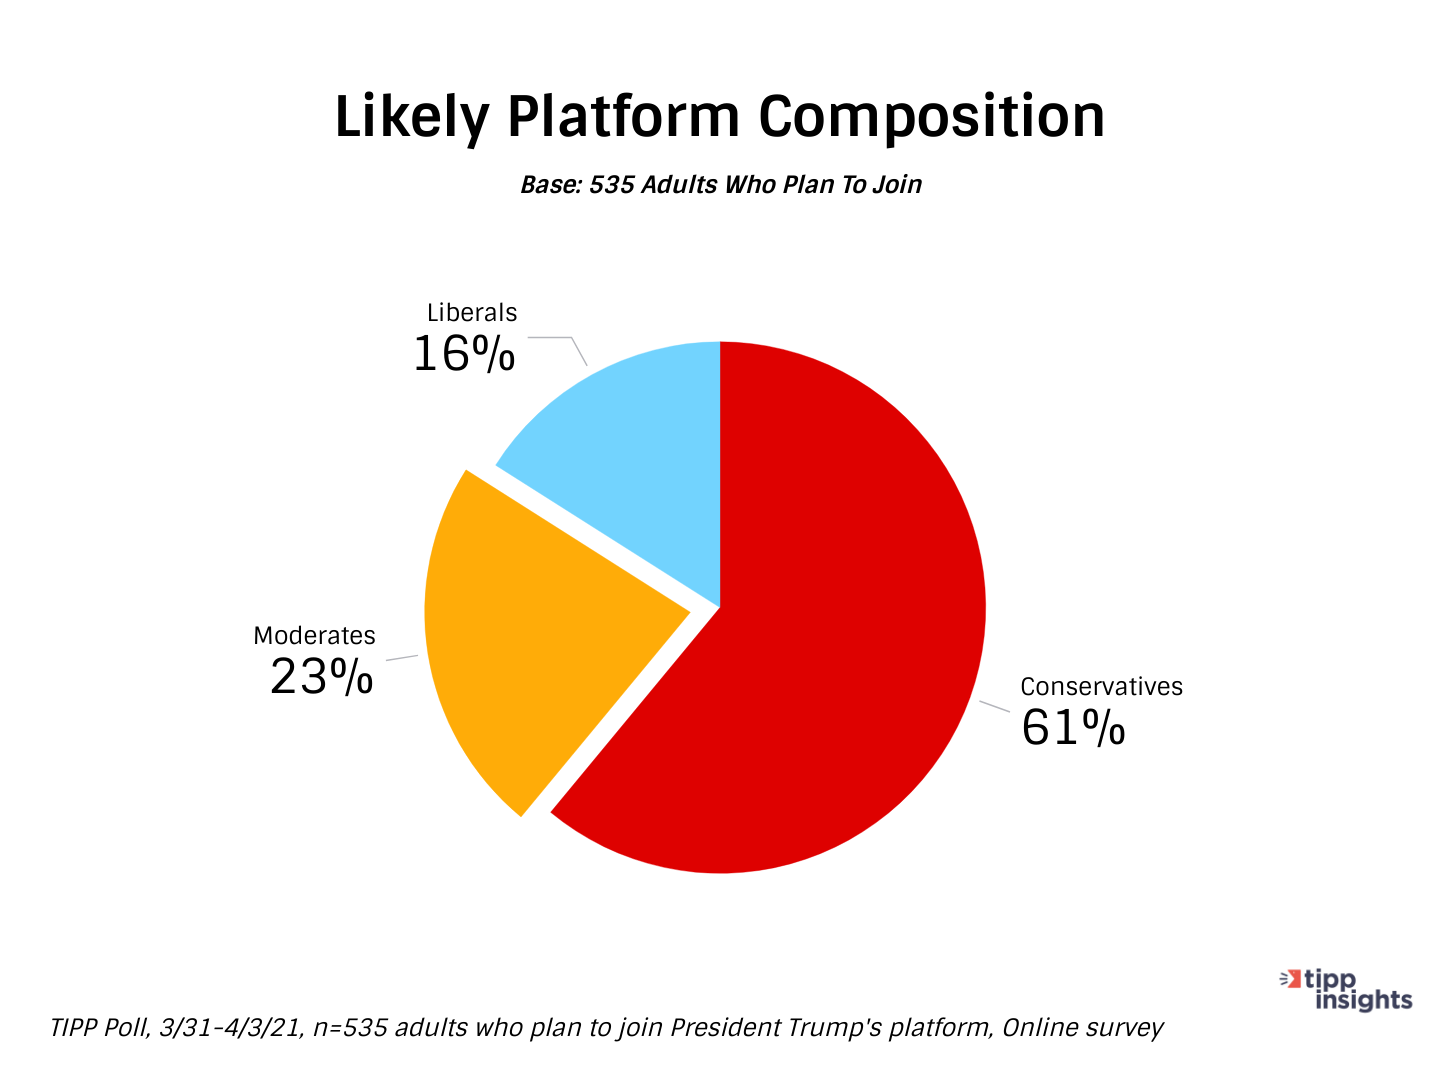 Donald Trumps Social APP likely PLatform Composition - TIPP Poll Results